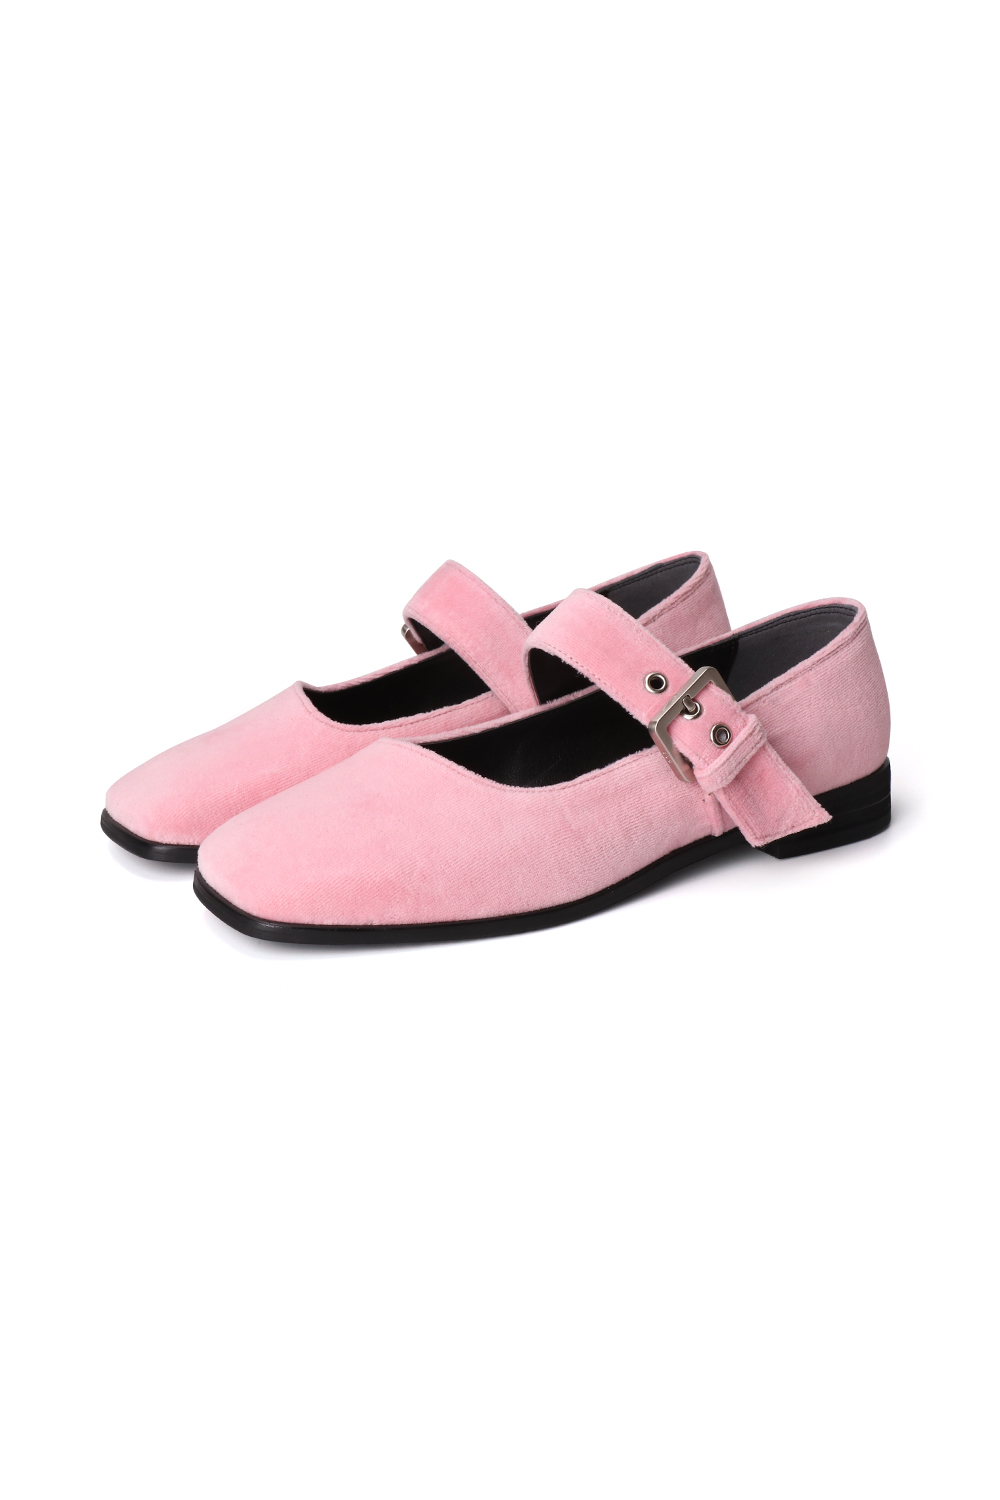 LILY VELOUR MARY JANE [BABY PINK]